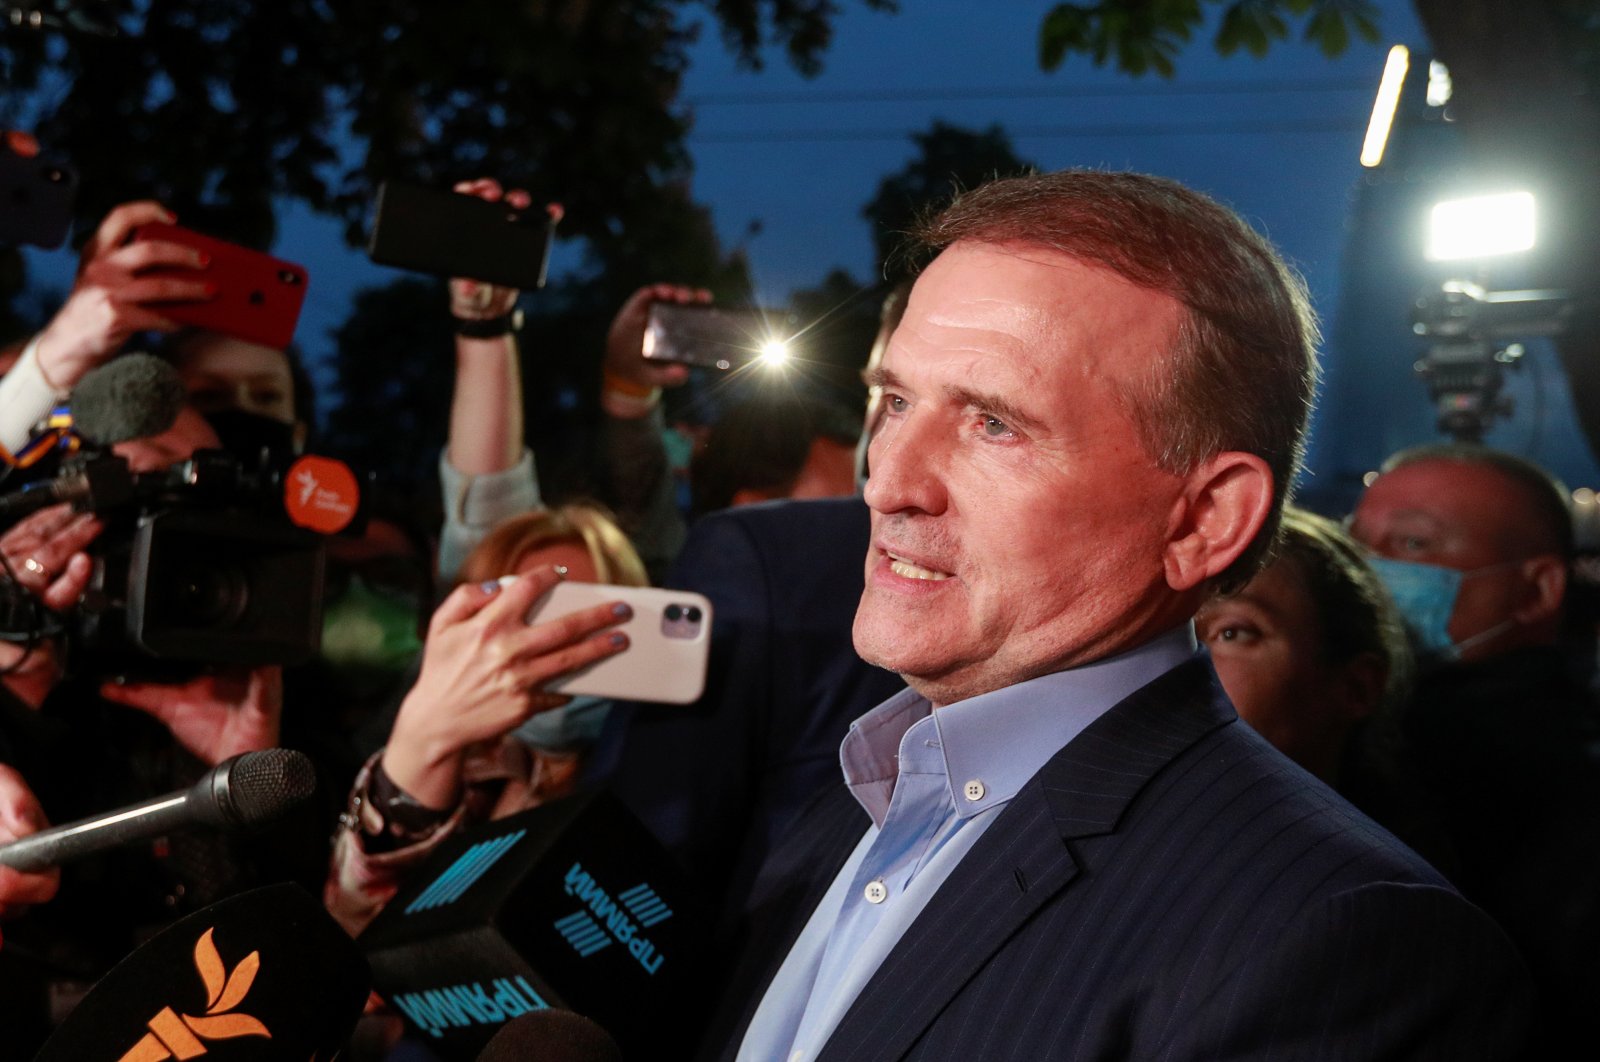 Leader of Opposition Platform - For Life political party Viktor Medvedchuk talks to the media after a court hearing in Kyiv, Ukraine May 13, 2021. (Reuters File Photo)